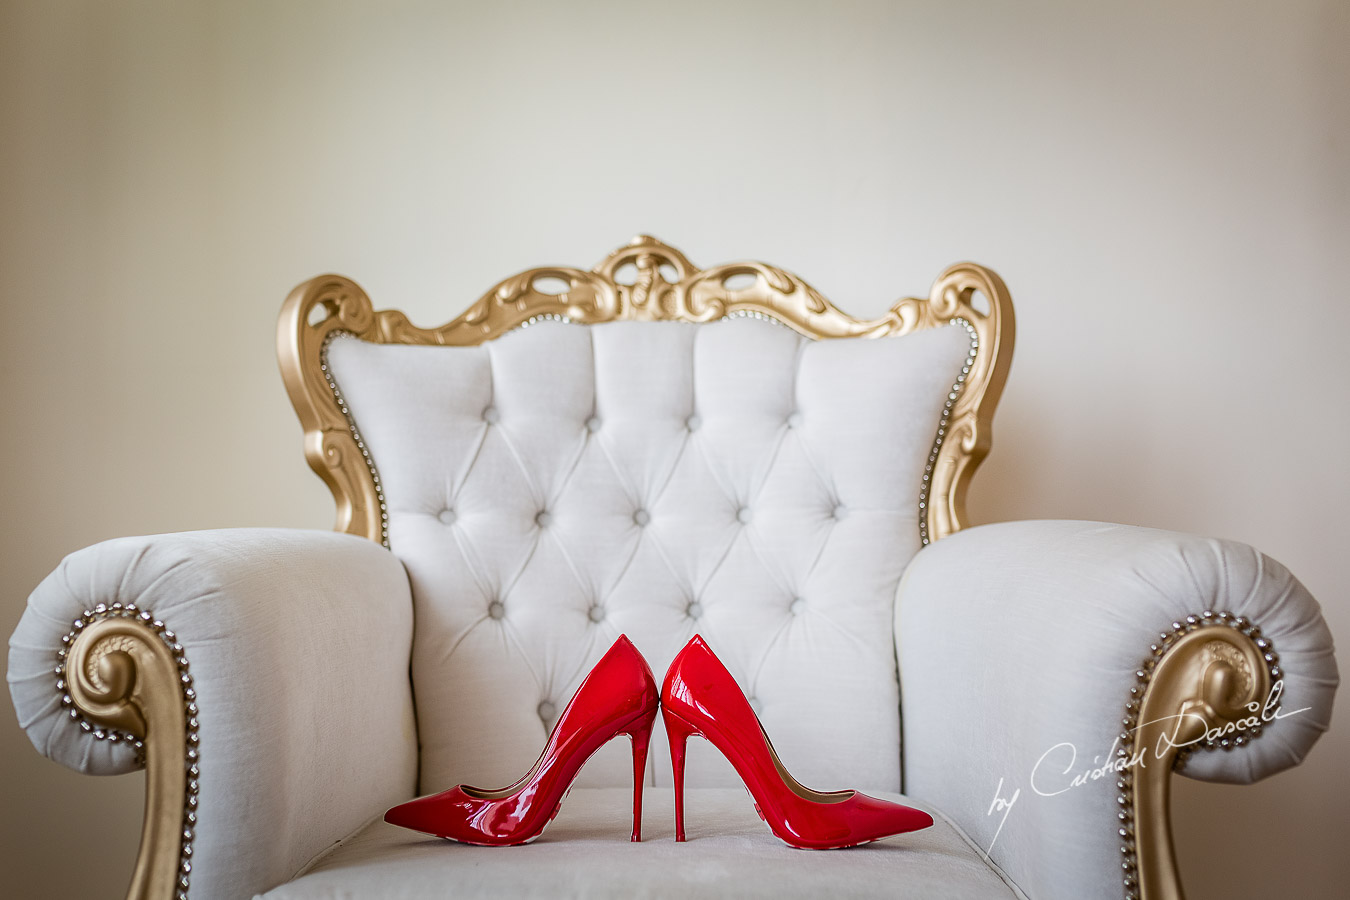 Bride's shoes photographed at a wedding in Nicosia by Cyprus Wedding Photographer Cristian Dascalu